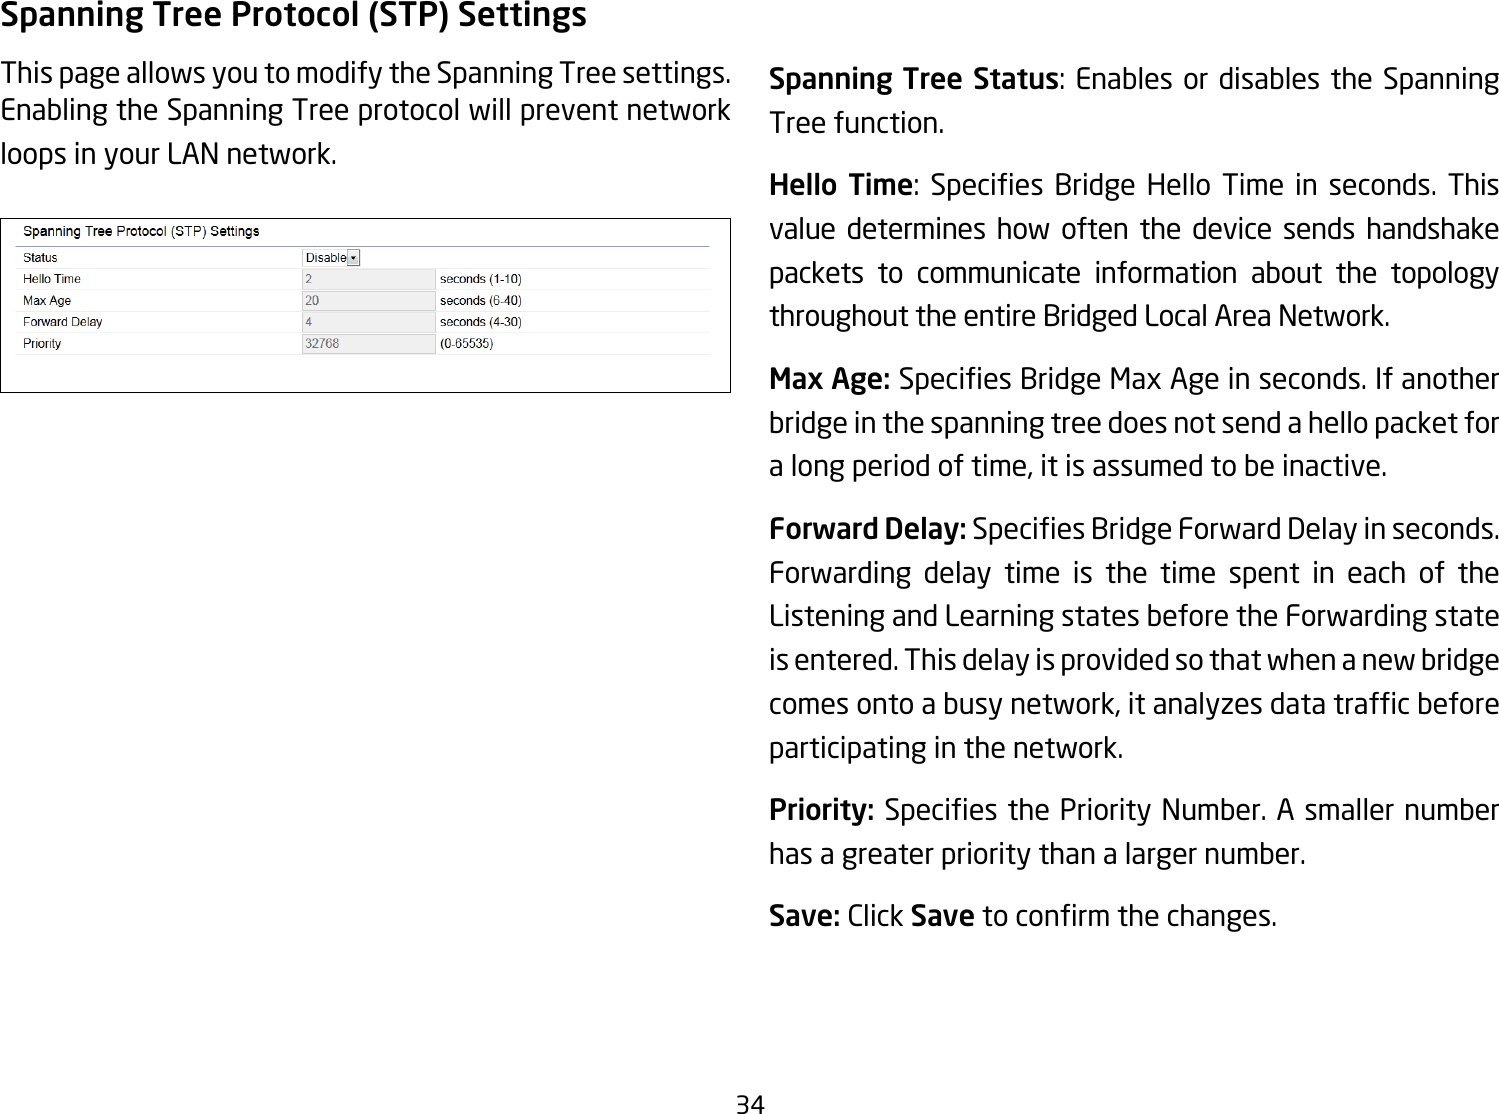 34Spanning Tree Protocol (STP) SettingsThis page allows you to modify the Spanning Tree settings. Enabling the Spanning Tree protocol will prevent network loops in your LAN network. Spanning Tree Status: Enables or disables the Spanning Tree function.Hello Time: Species Bridge Hello Time in seconds. Thisvalue determines how often the device sends handshake packets to communicate information about the topology throughout the entire Bridged Local Area Network.Max Age: SpeciesBridgeMaxAgeinseconds.Ifanotherbridge in the spanning tree does not send a hello packet for a long period of time, it is assumed to be inactive.Forward Delay:SpeciesBridgeForwardDelayinseconds.Forwarding delay time is the time spent in each of the Listening and Learning states before the Forwarding state is entered. This delay is provided so that when a new bridge comesontoabusynetwork,itanalyzesdatatrafcbeforeparticipating in the network.Priority: SpeciesthePriorityNumber.Asmallernumberhas a greater priority than a larger number.Save: Click Savetoconrmthechanges.